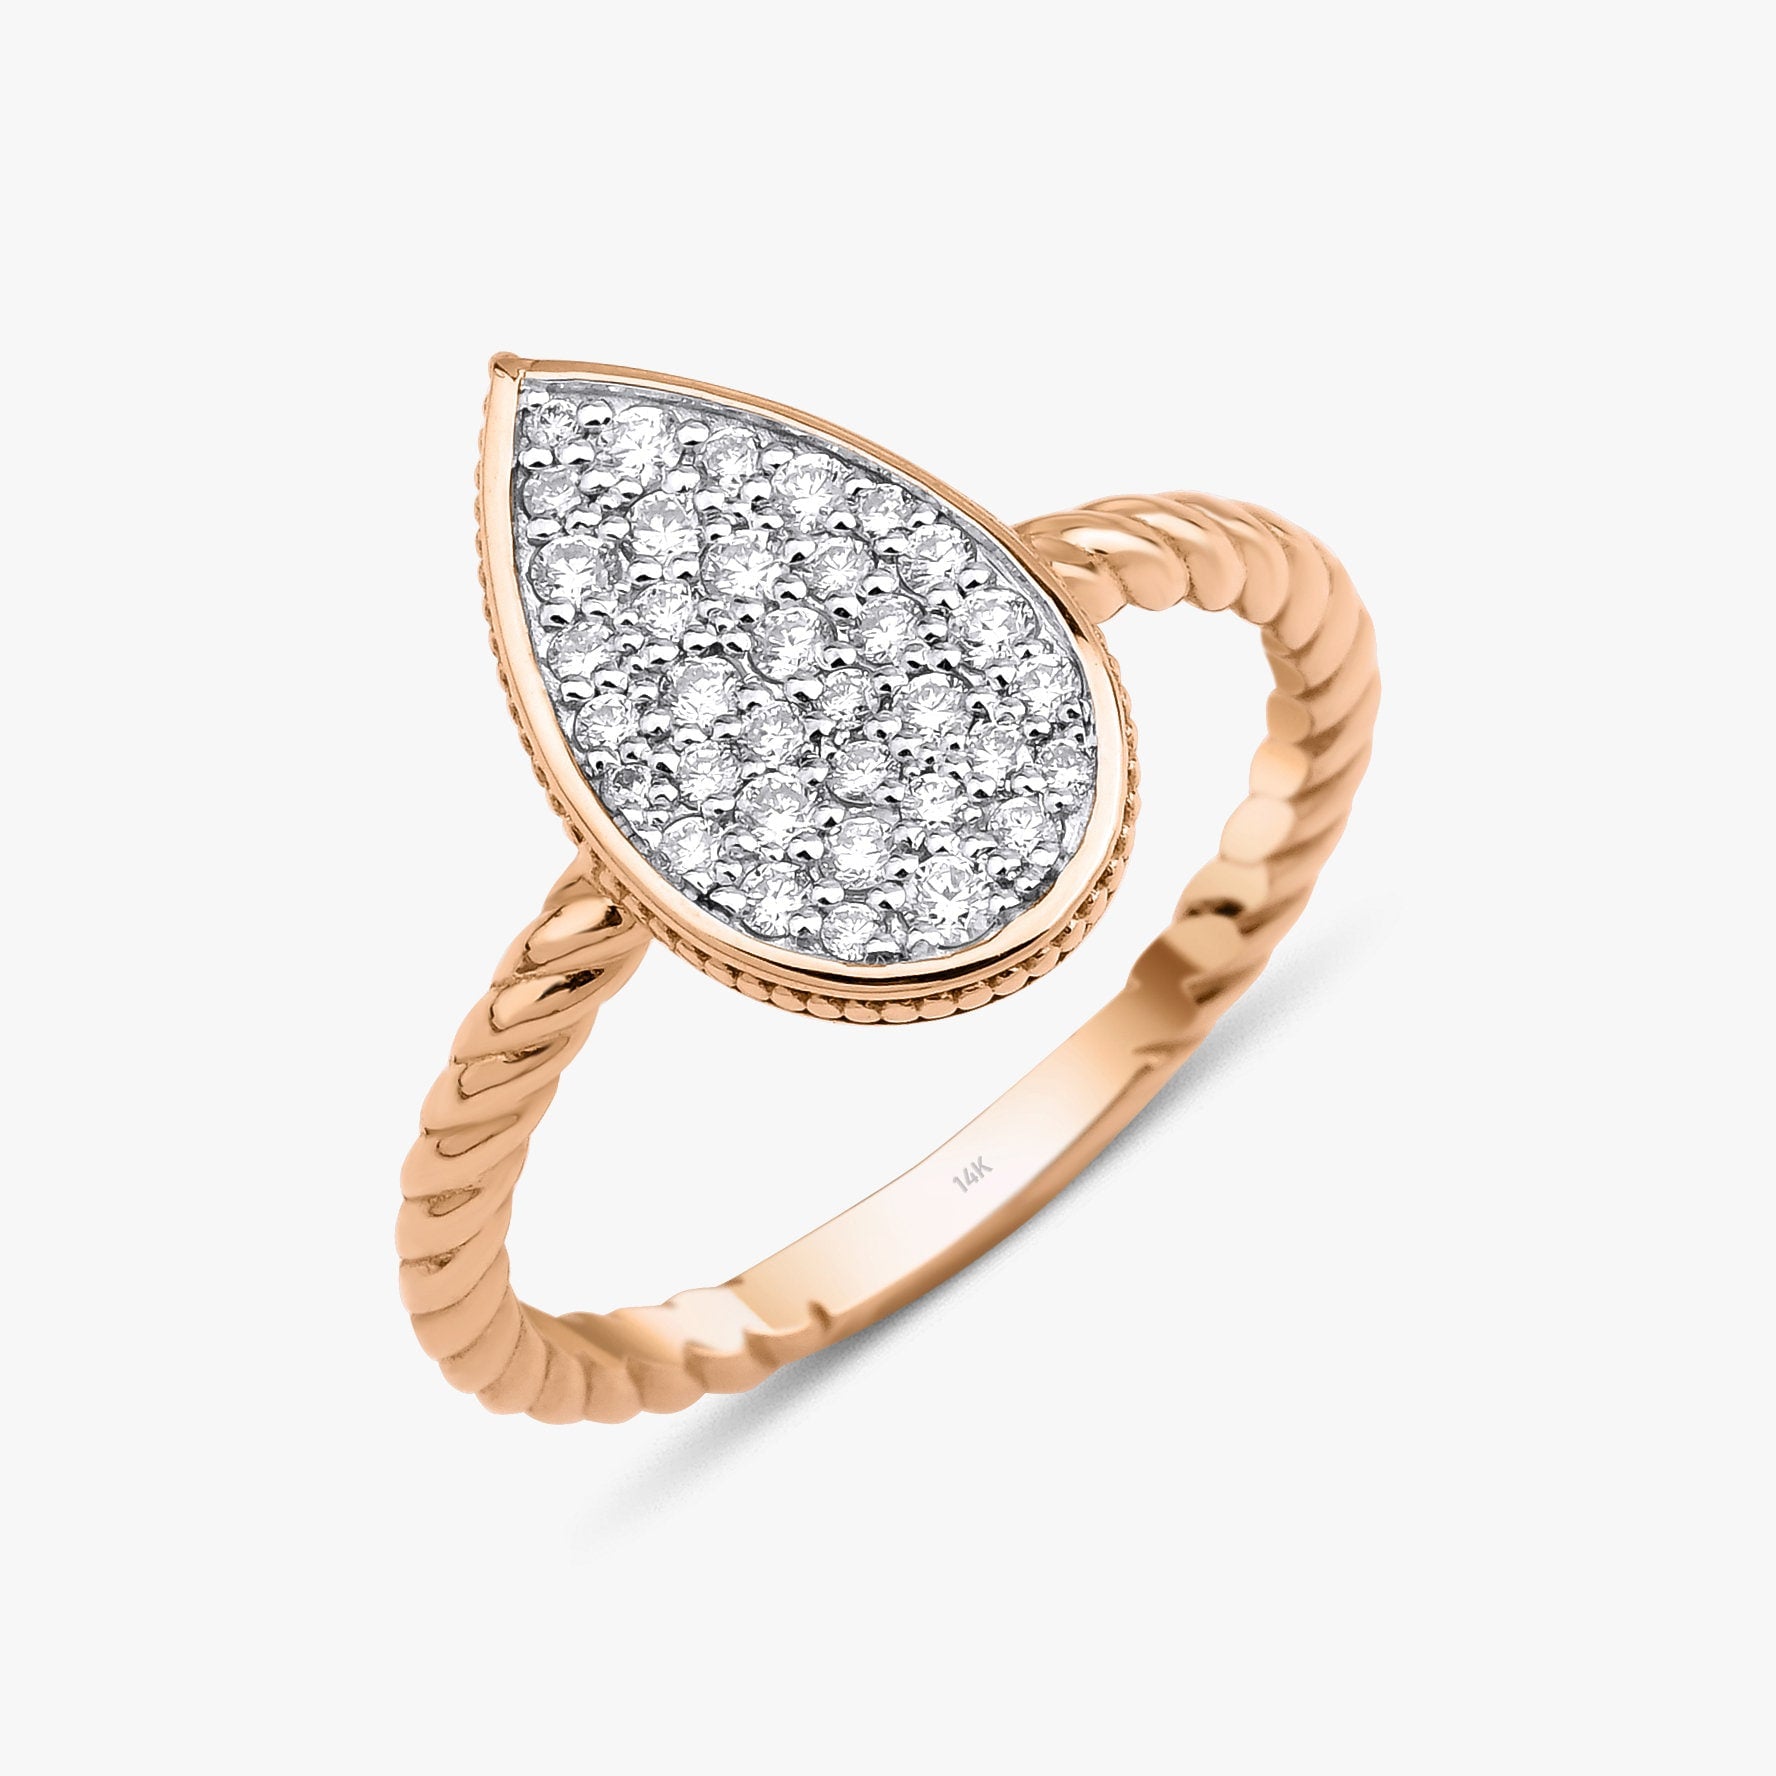 Pave Diamond Drop Ring in 14K Gold